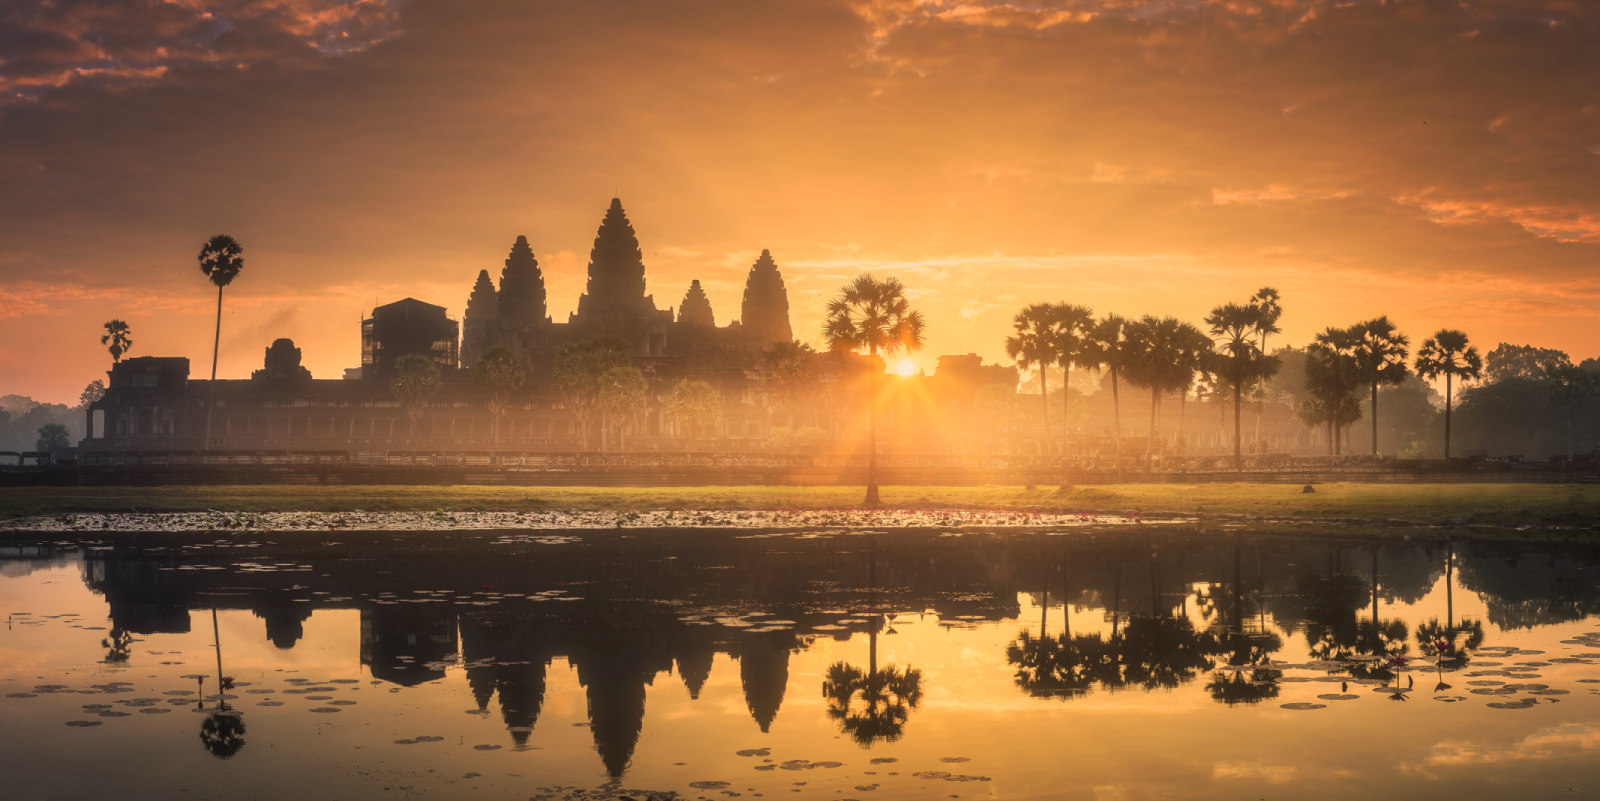 Things to see in Cambodia